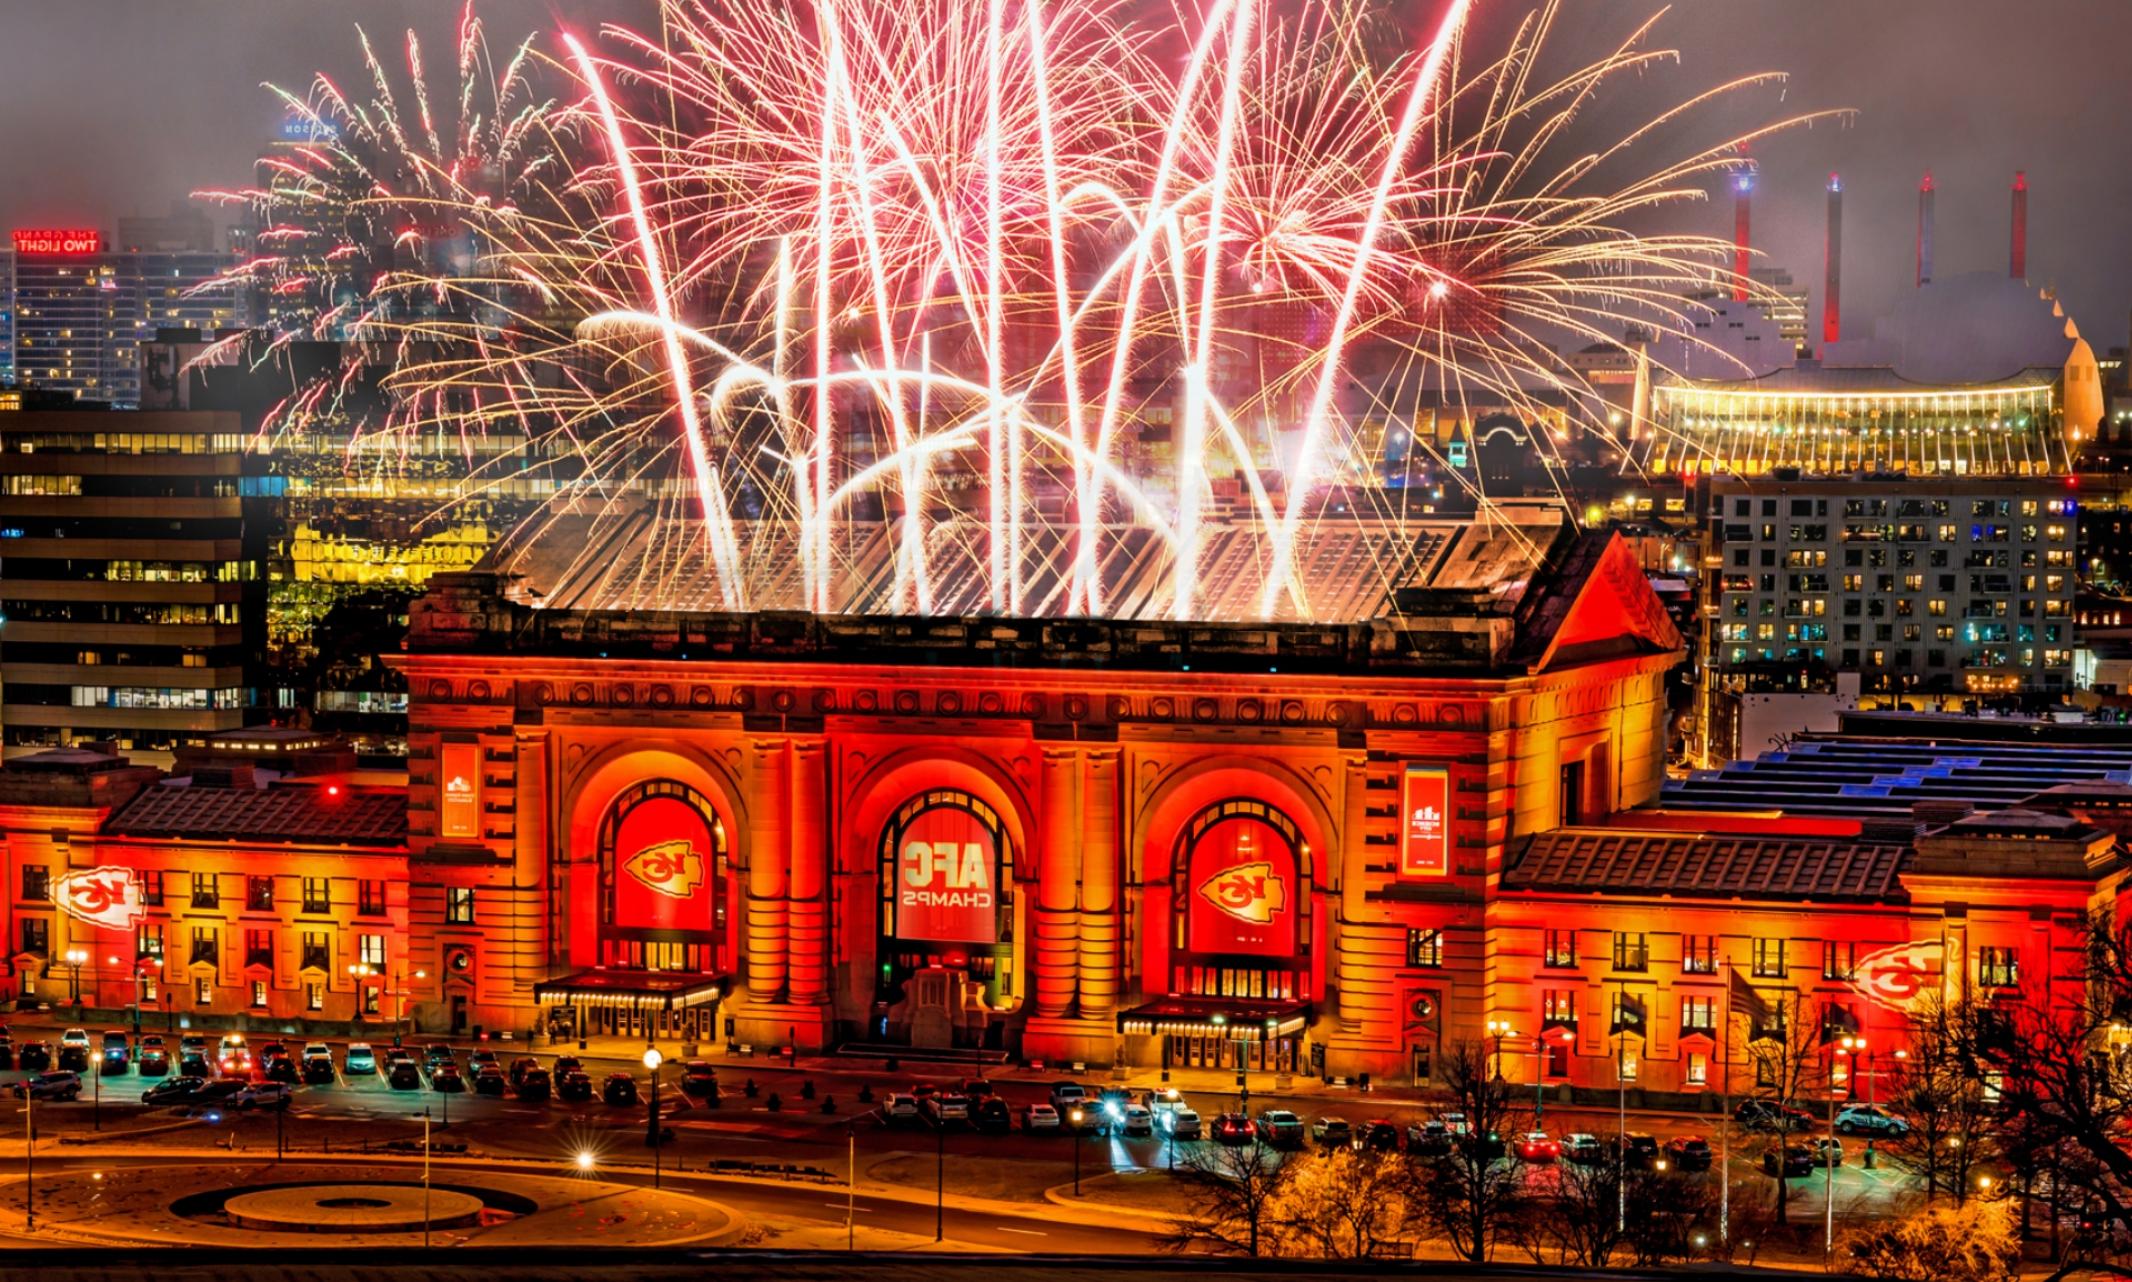 Union Station is illuminated with Kansas City Chiefs red and gold